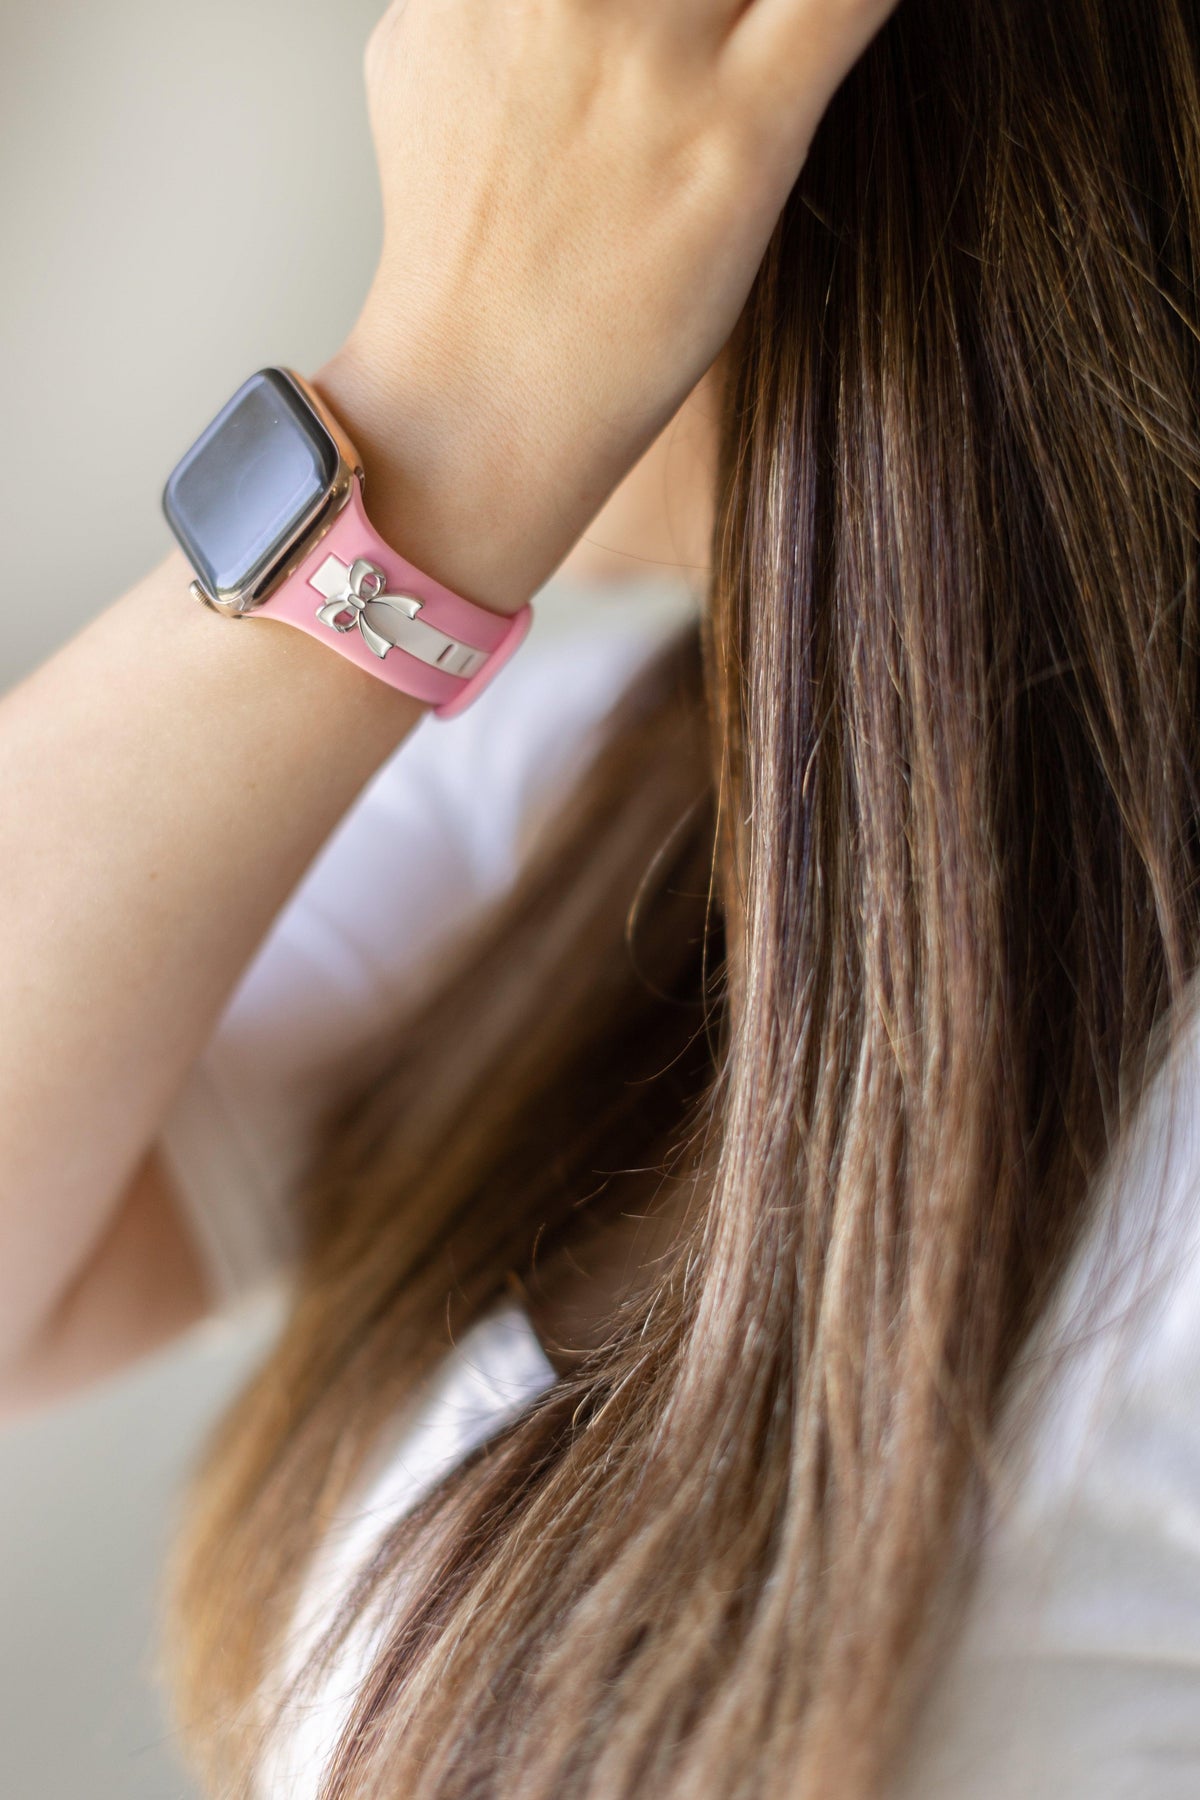 “It Girl” Doll Pink Apple Watch Band - Strawberry Avocados